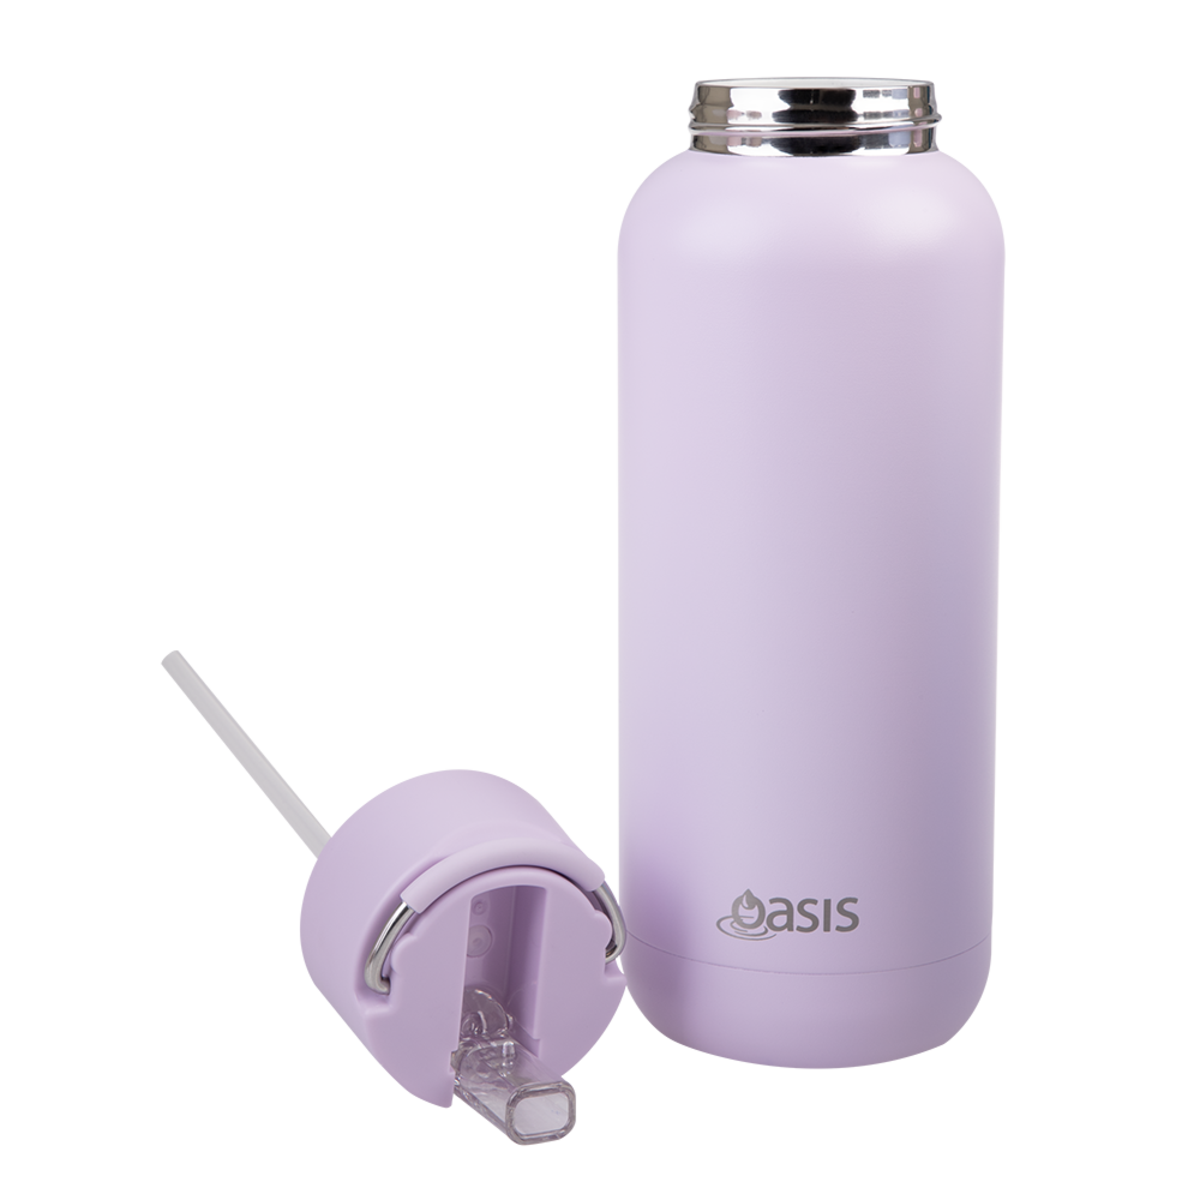 Oasis Ceramic Lined Stainless Steel Triple Wall Insulated Moda Drink Bottle 1L